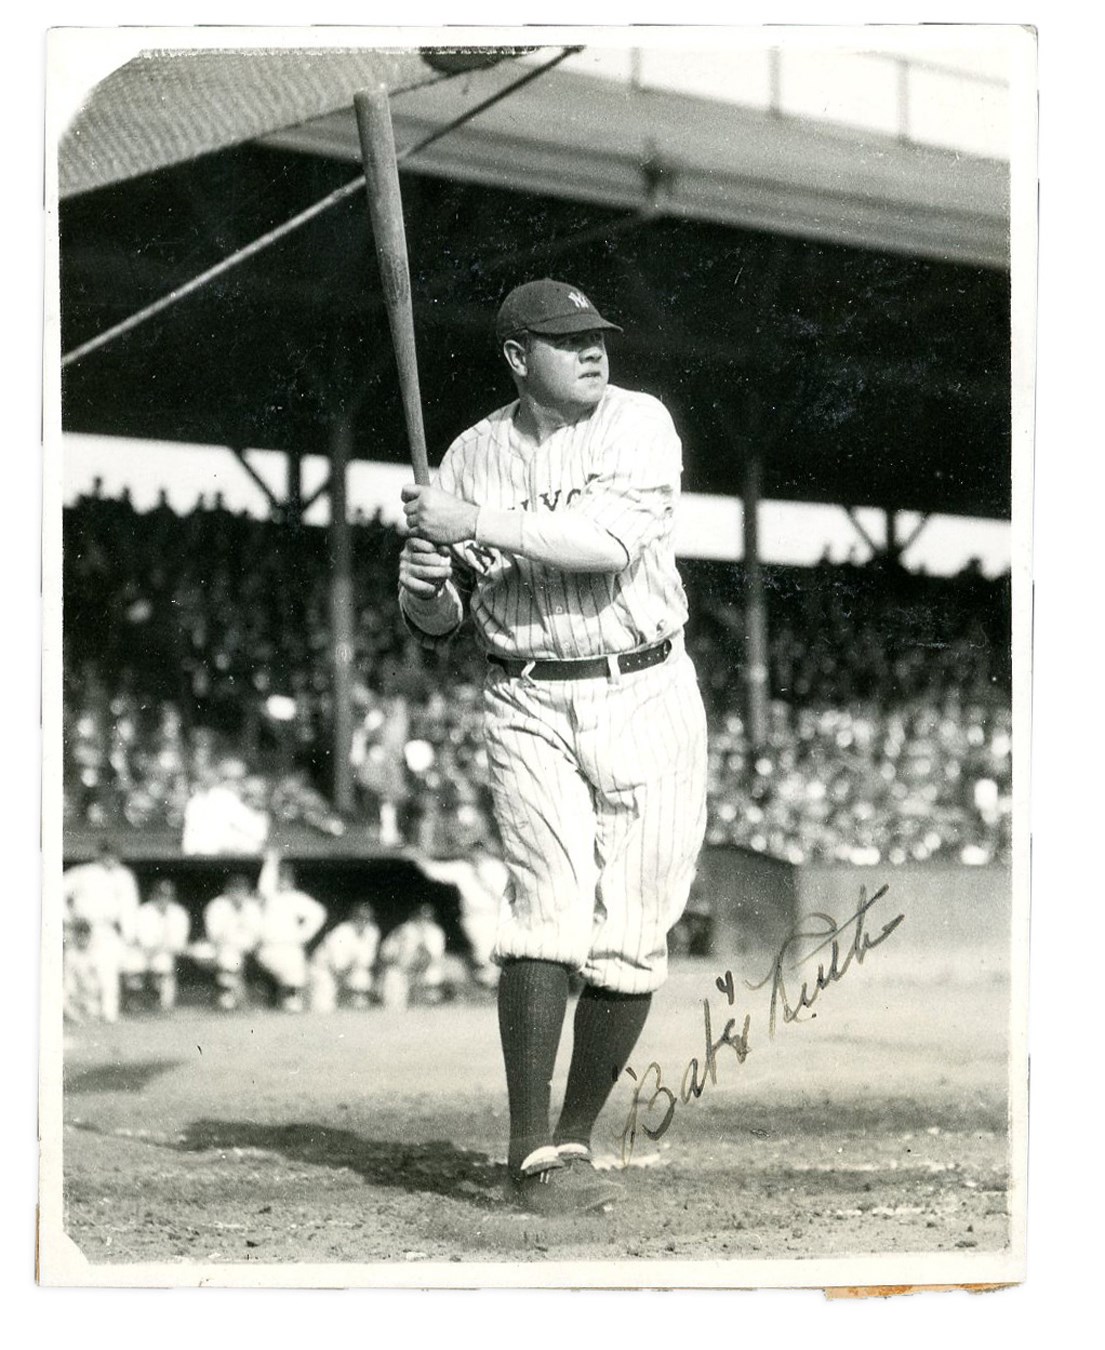 Early & Exceptional Babe Ruth Signed Photograph Graded PSA/DNA "8" Autograph